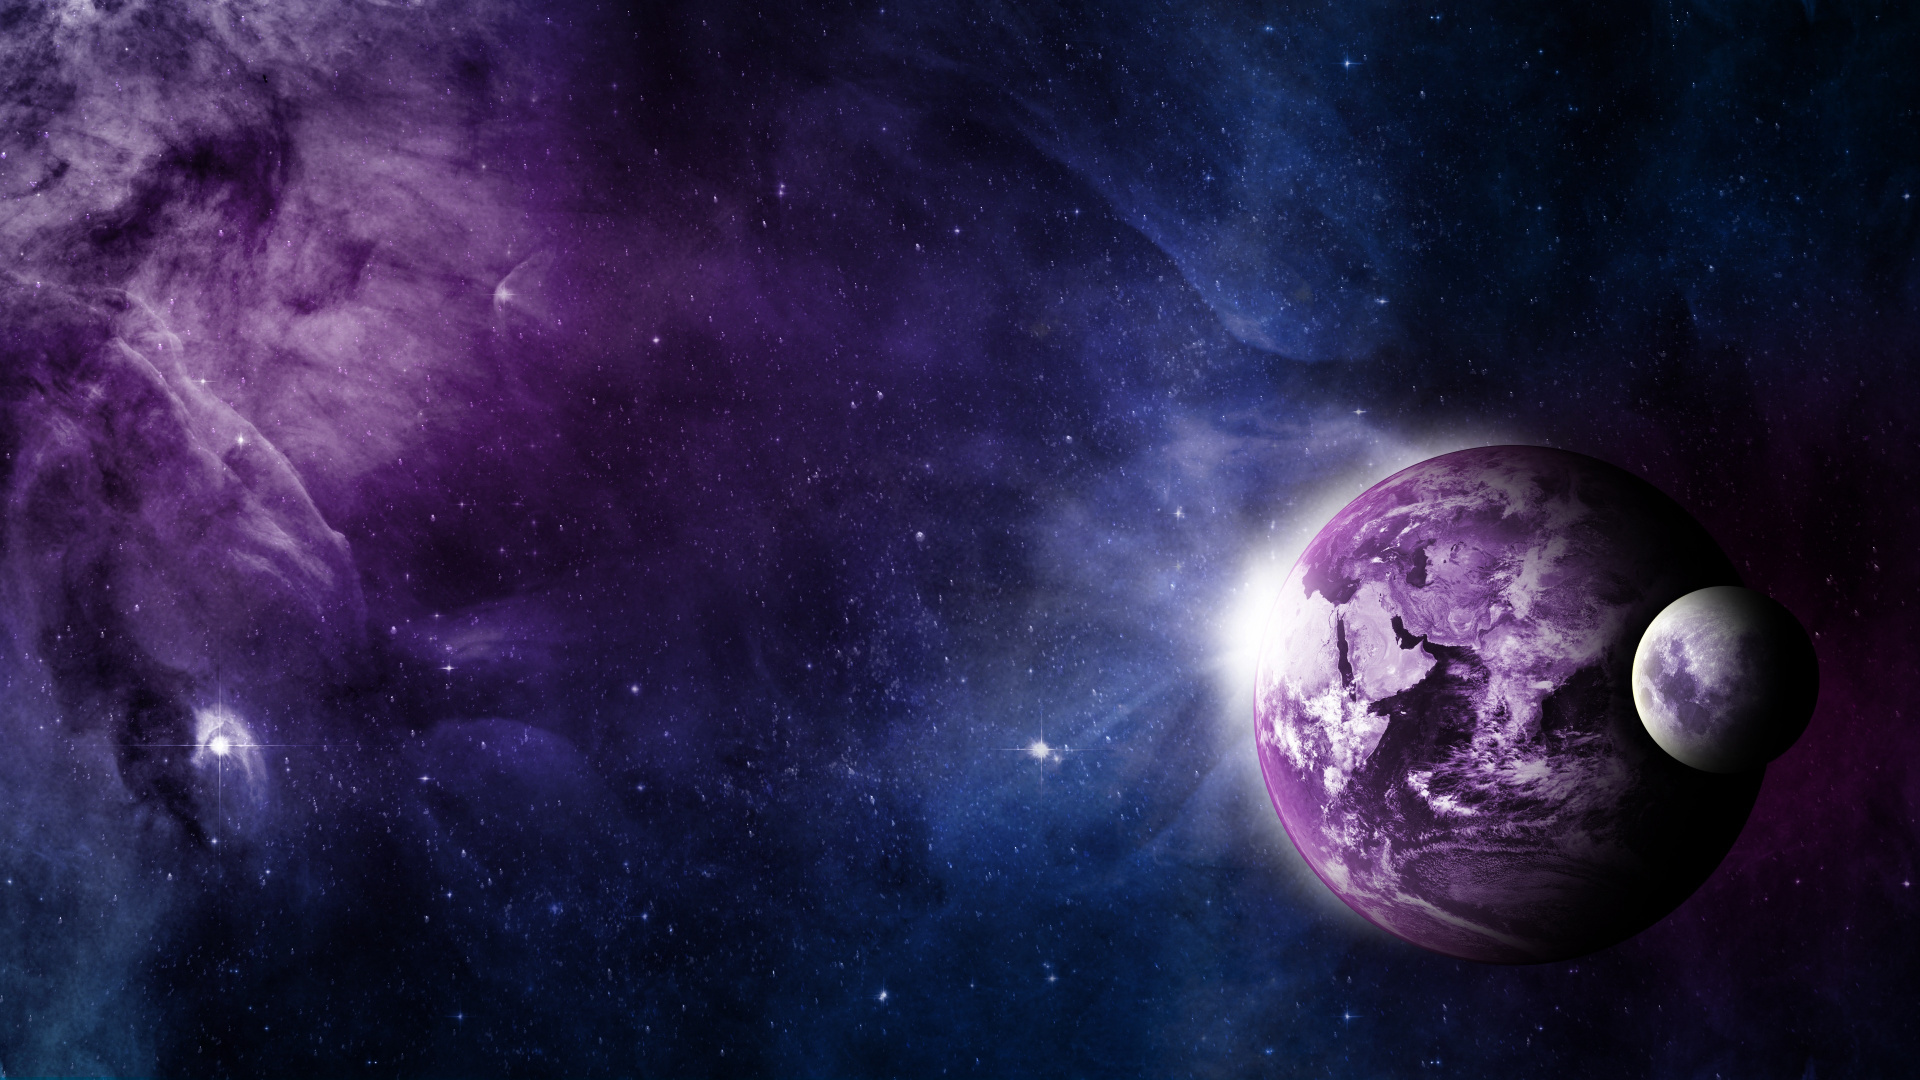 Purple and Black Planet Illustration. Wallpaper in 1920x1080 Resolution